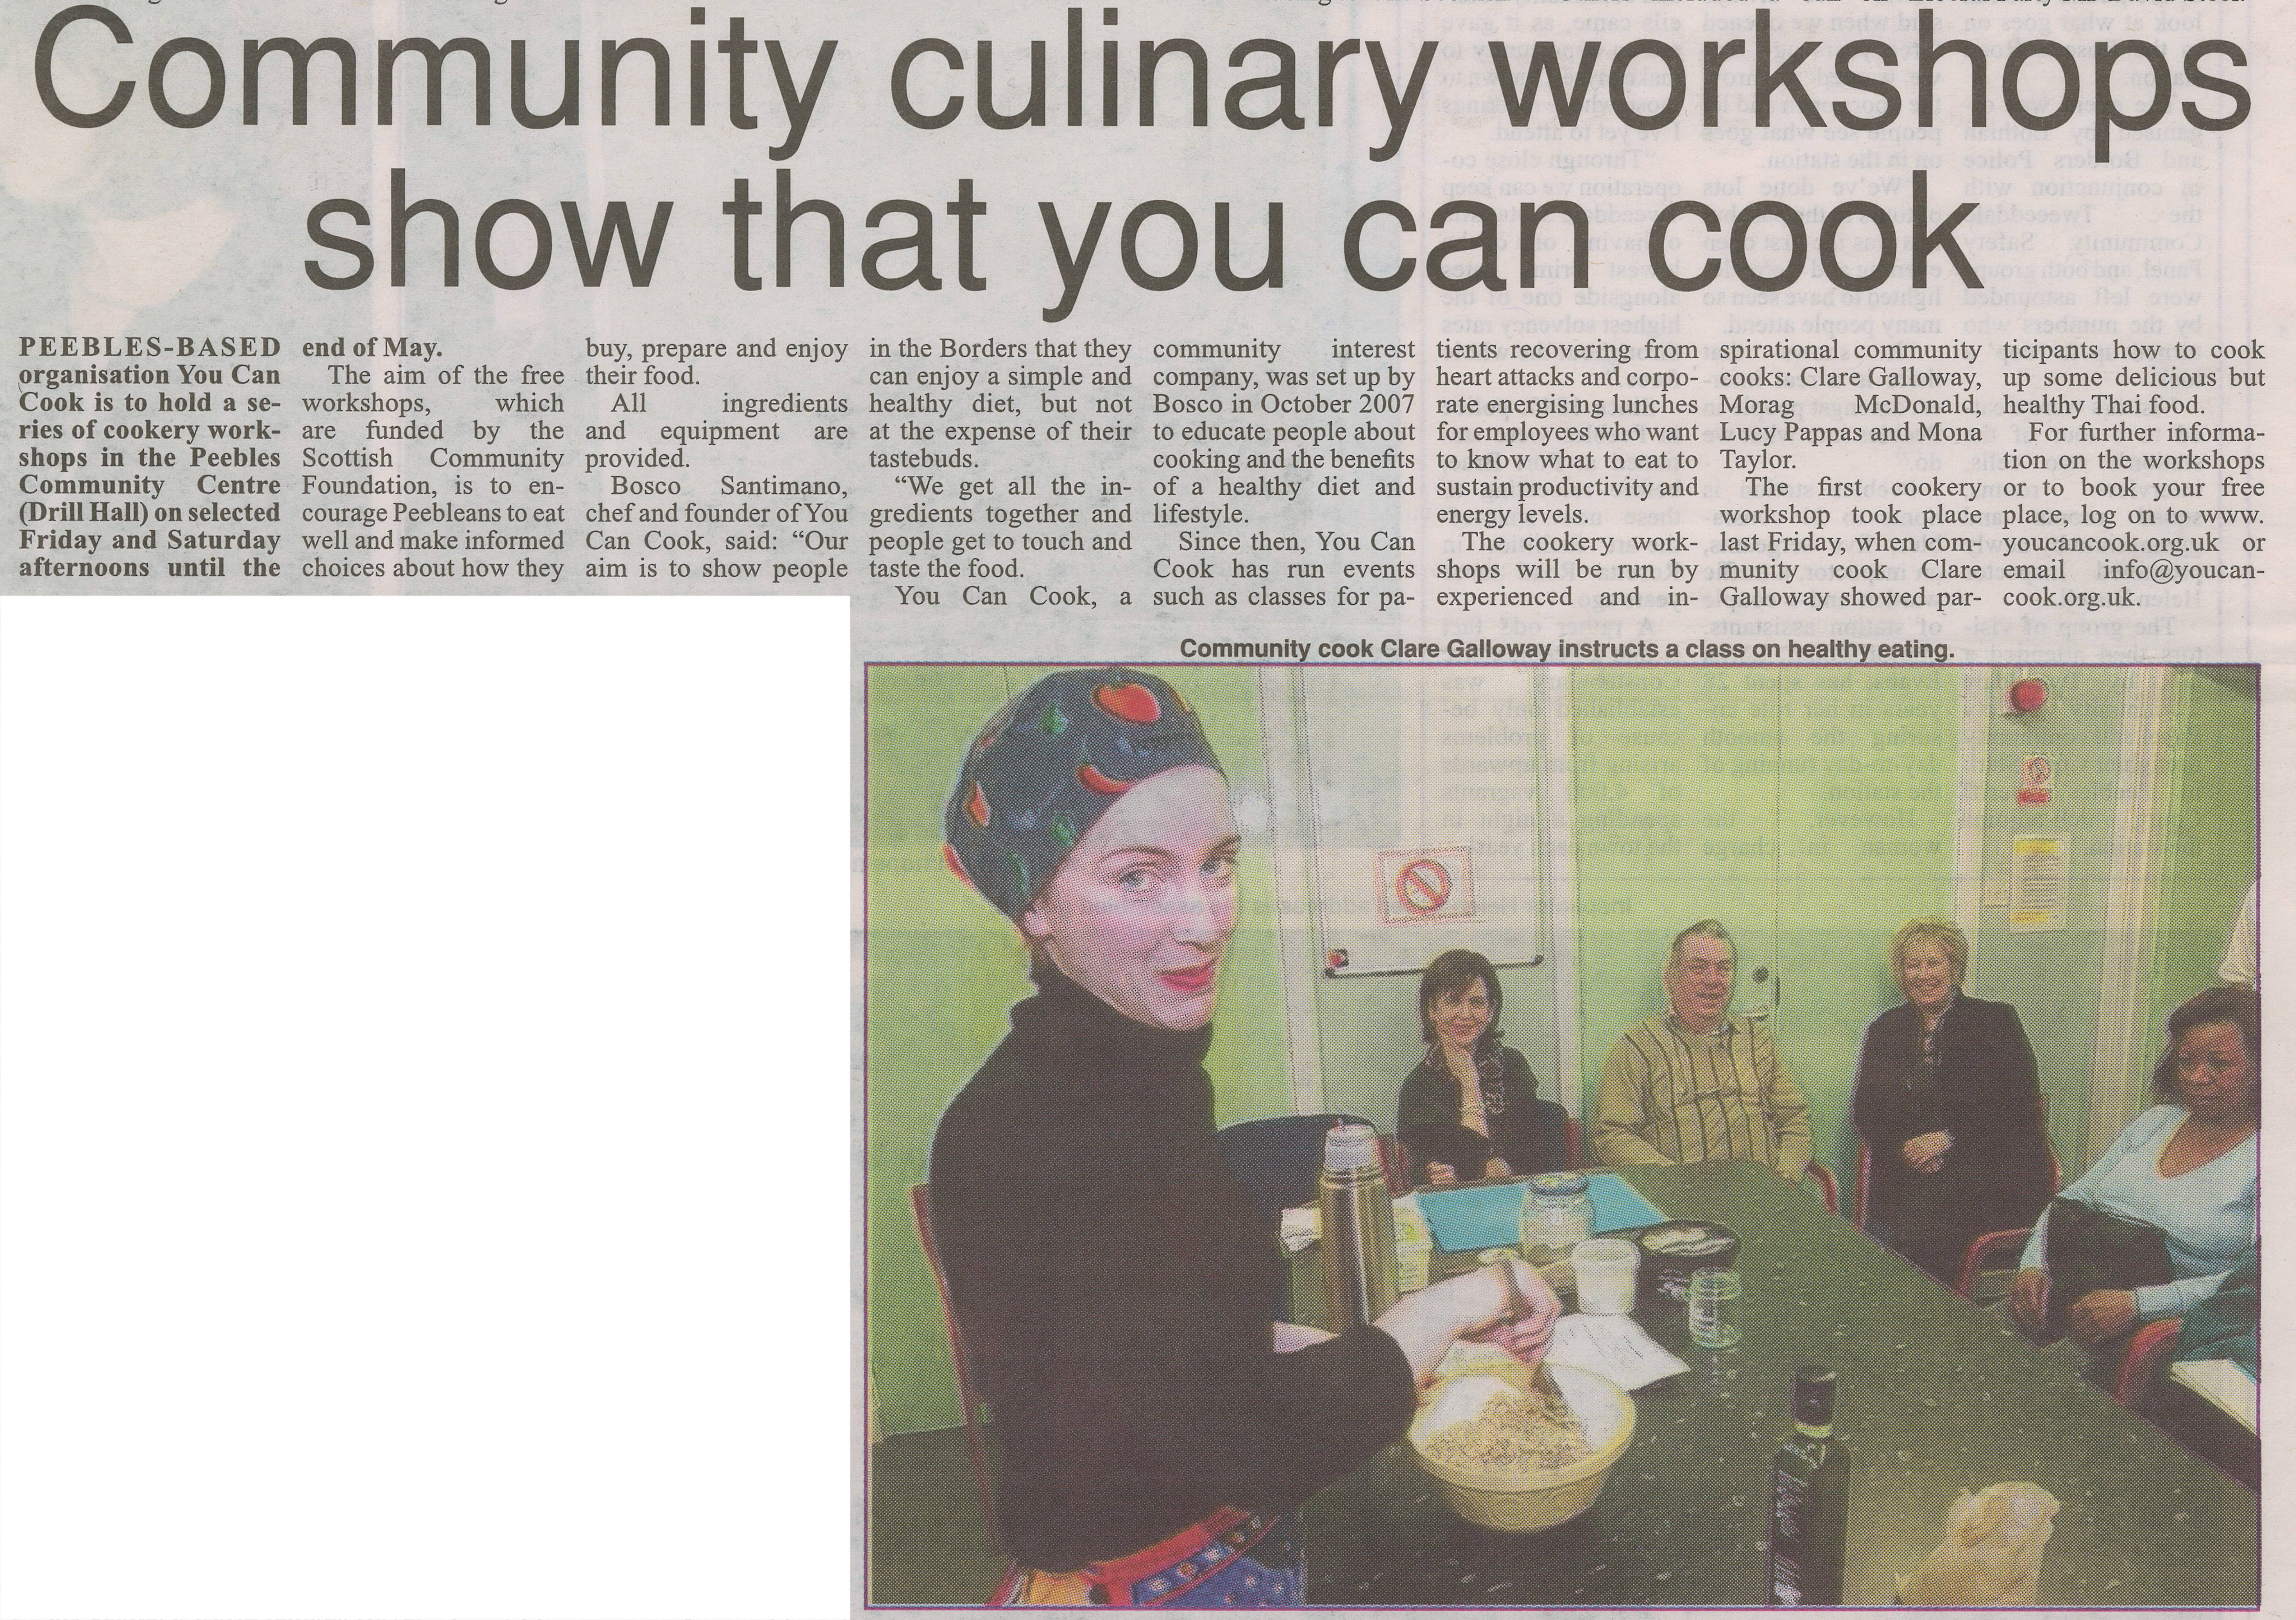 Press Clipping: Community culinary workshops show that you can cook